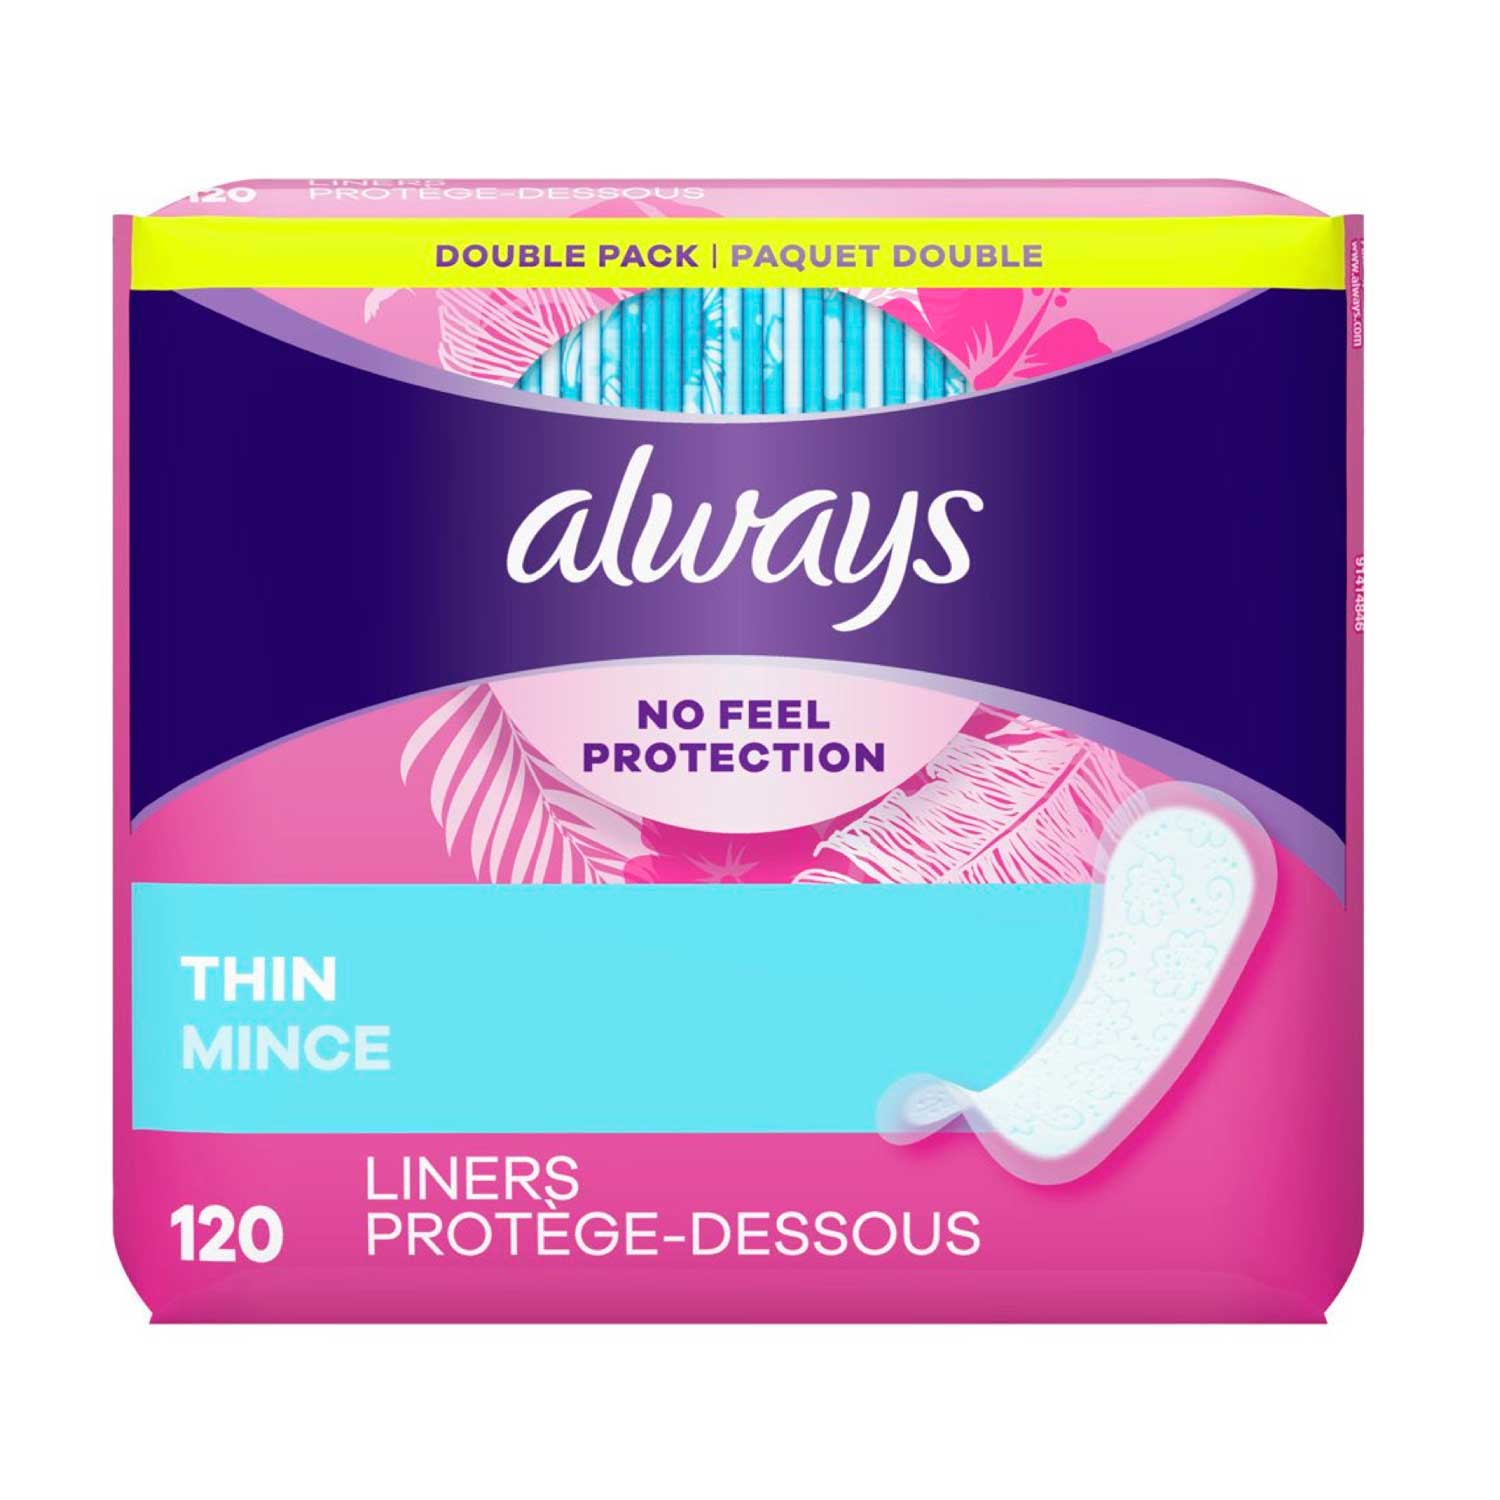 Protectores Diarios Always No Feel. 120 pads